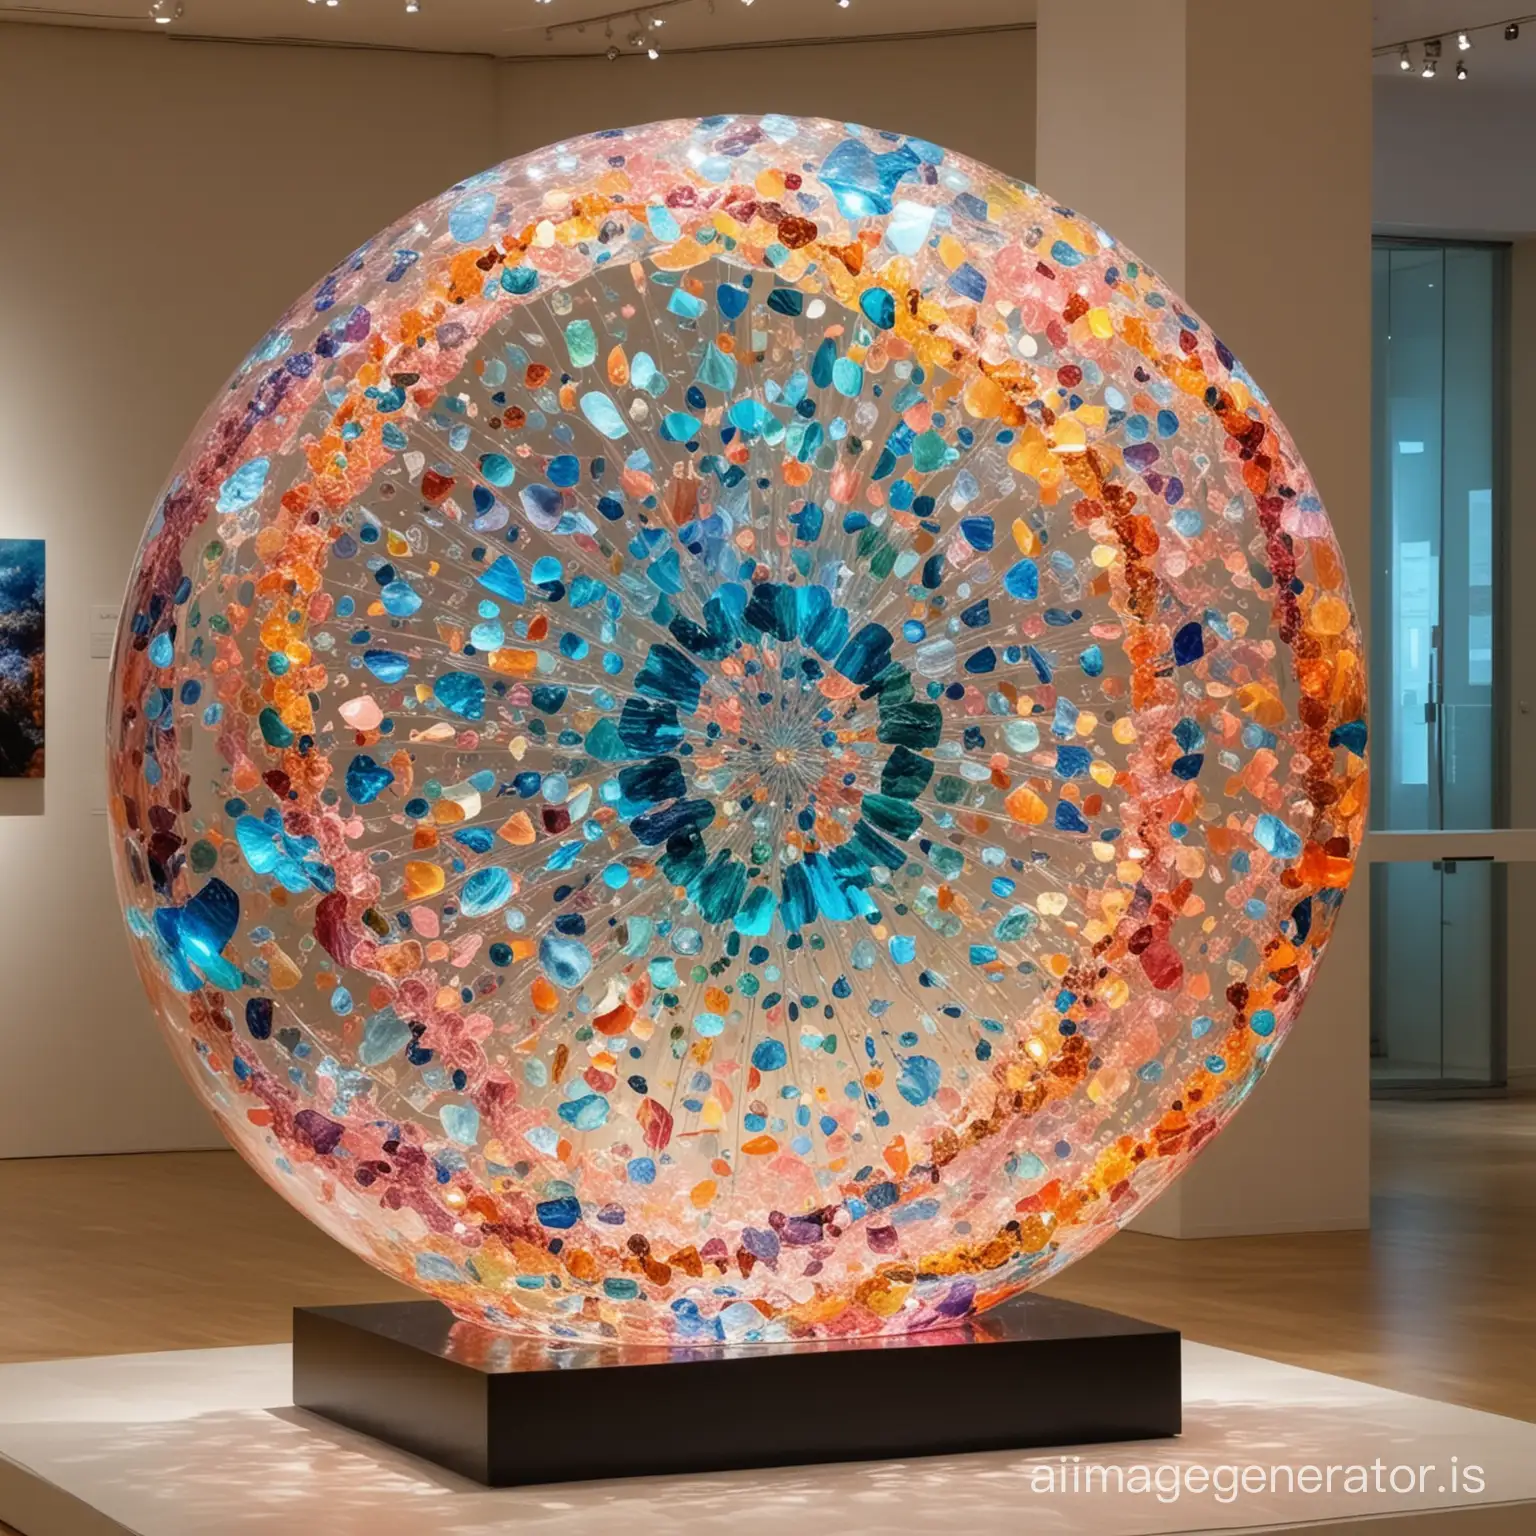 a very big opal  colorful sculpture made  of shiny colored transparent glass  in the art gallery with special light of them